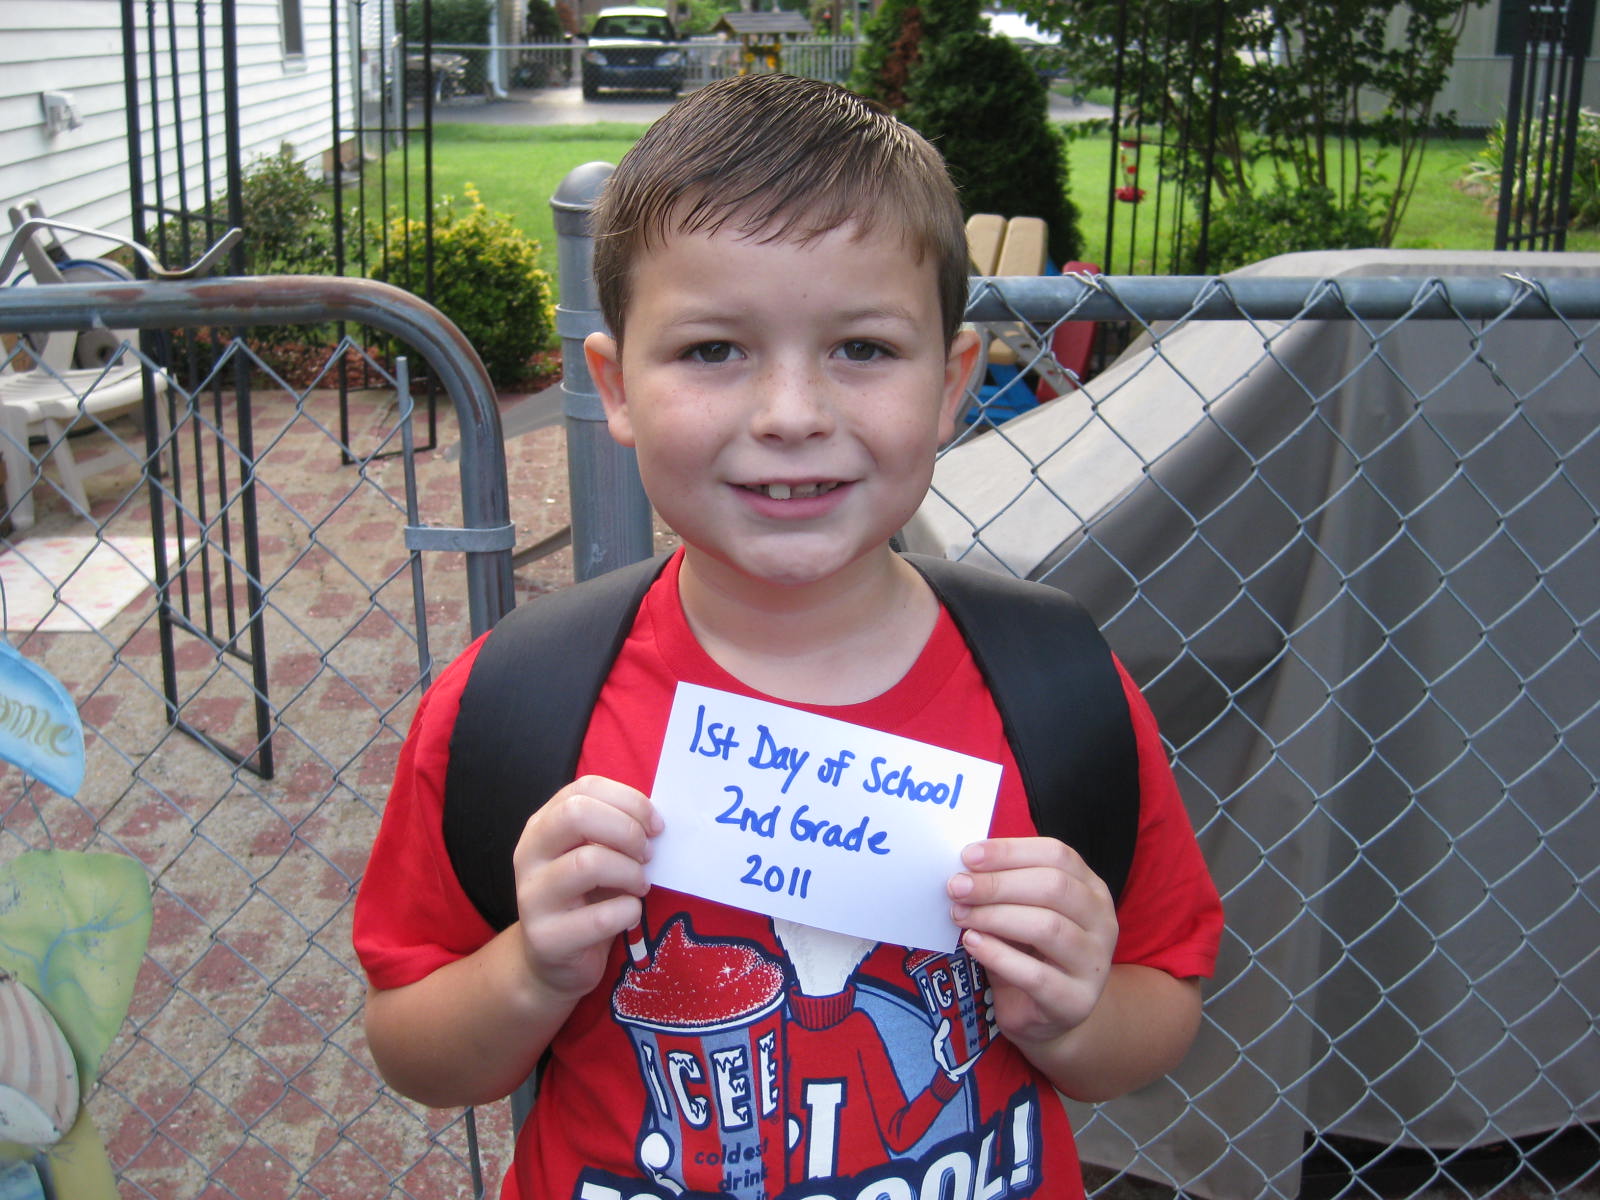 Losing It All: Caiden's First Day of School - 2nd Grade